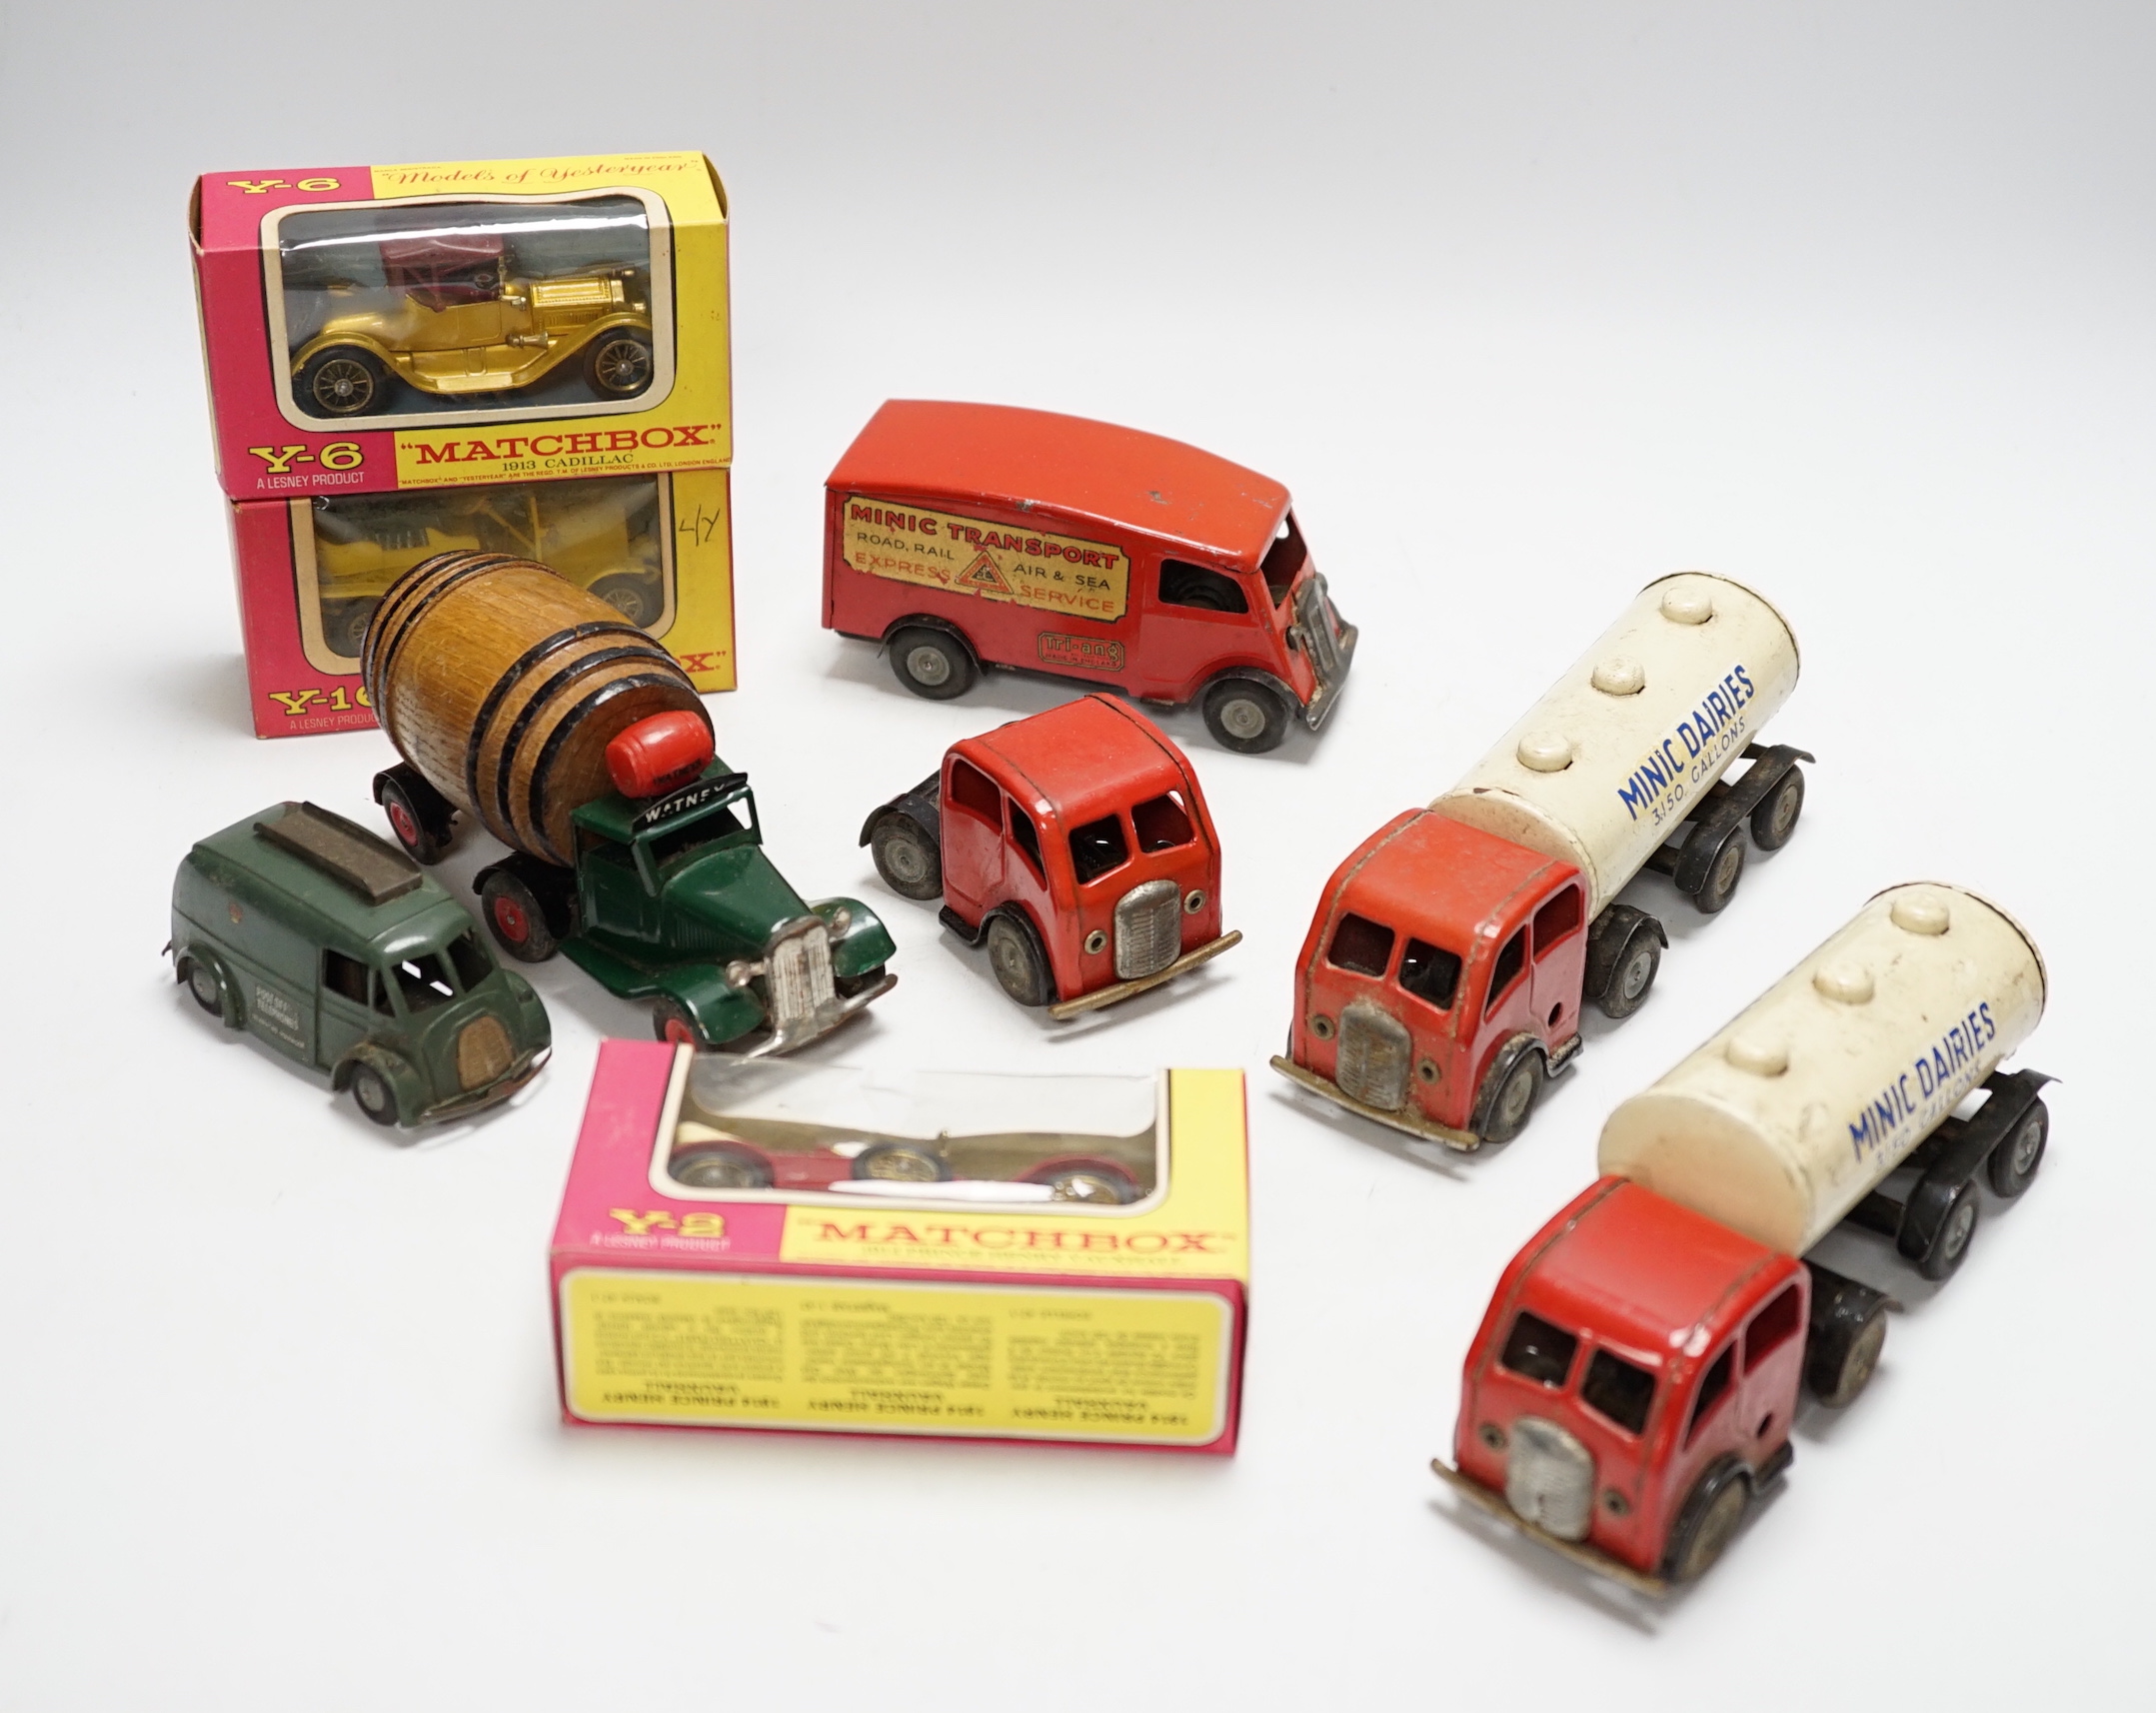 Collection of Tri-ang Minic tinplate vehicles and Matchbox diecast vehicles including ten Tri-ang Minic clockwork vehicles; two Milk Tankers, two Standard Vanguards, a Riley Police Car, a Brewery Tanker, a Minic Transpor